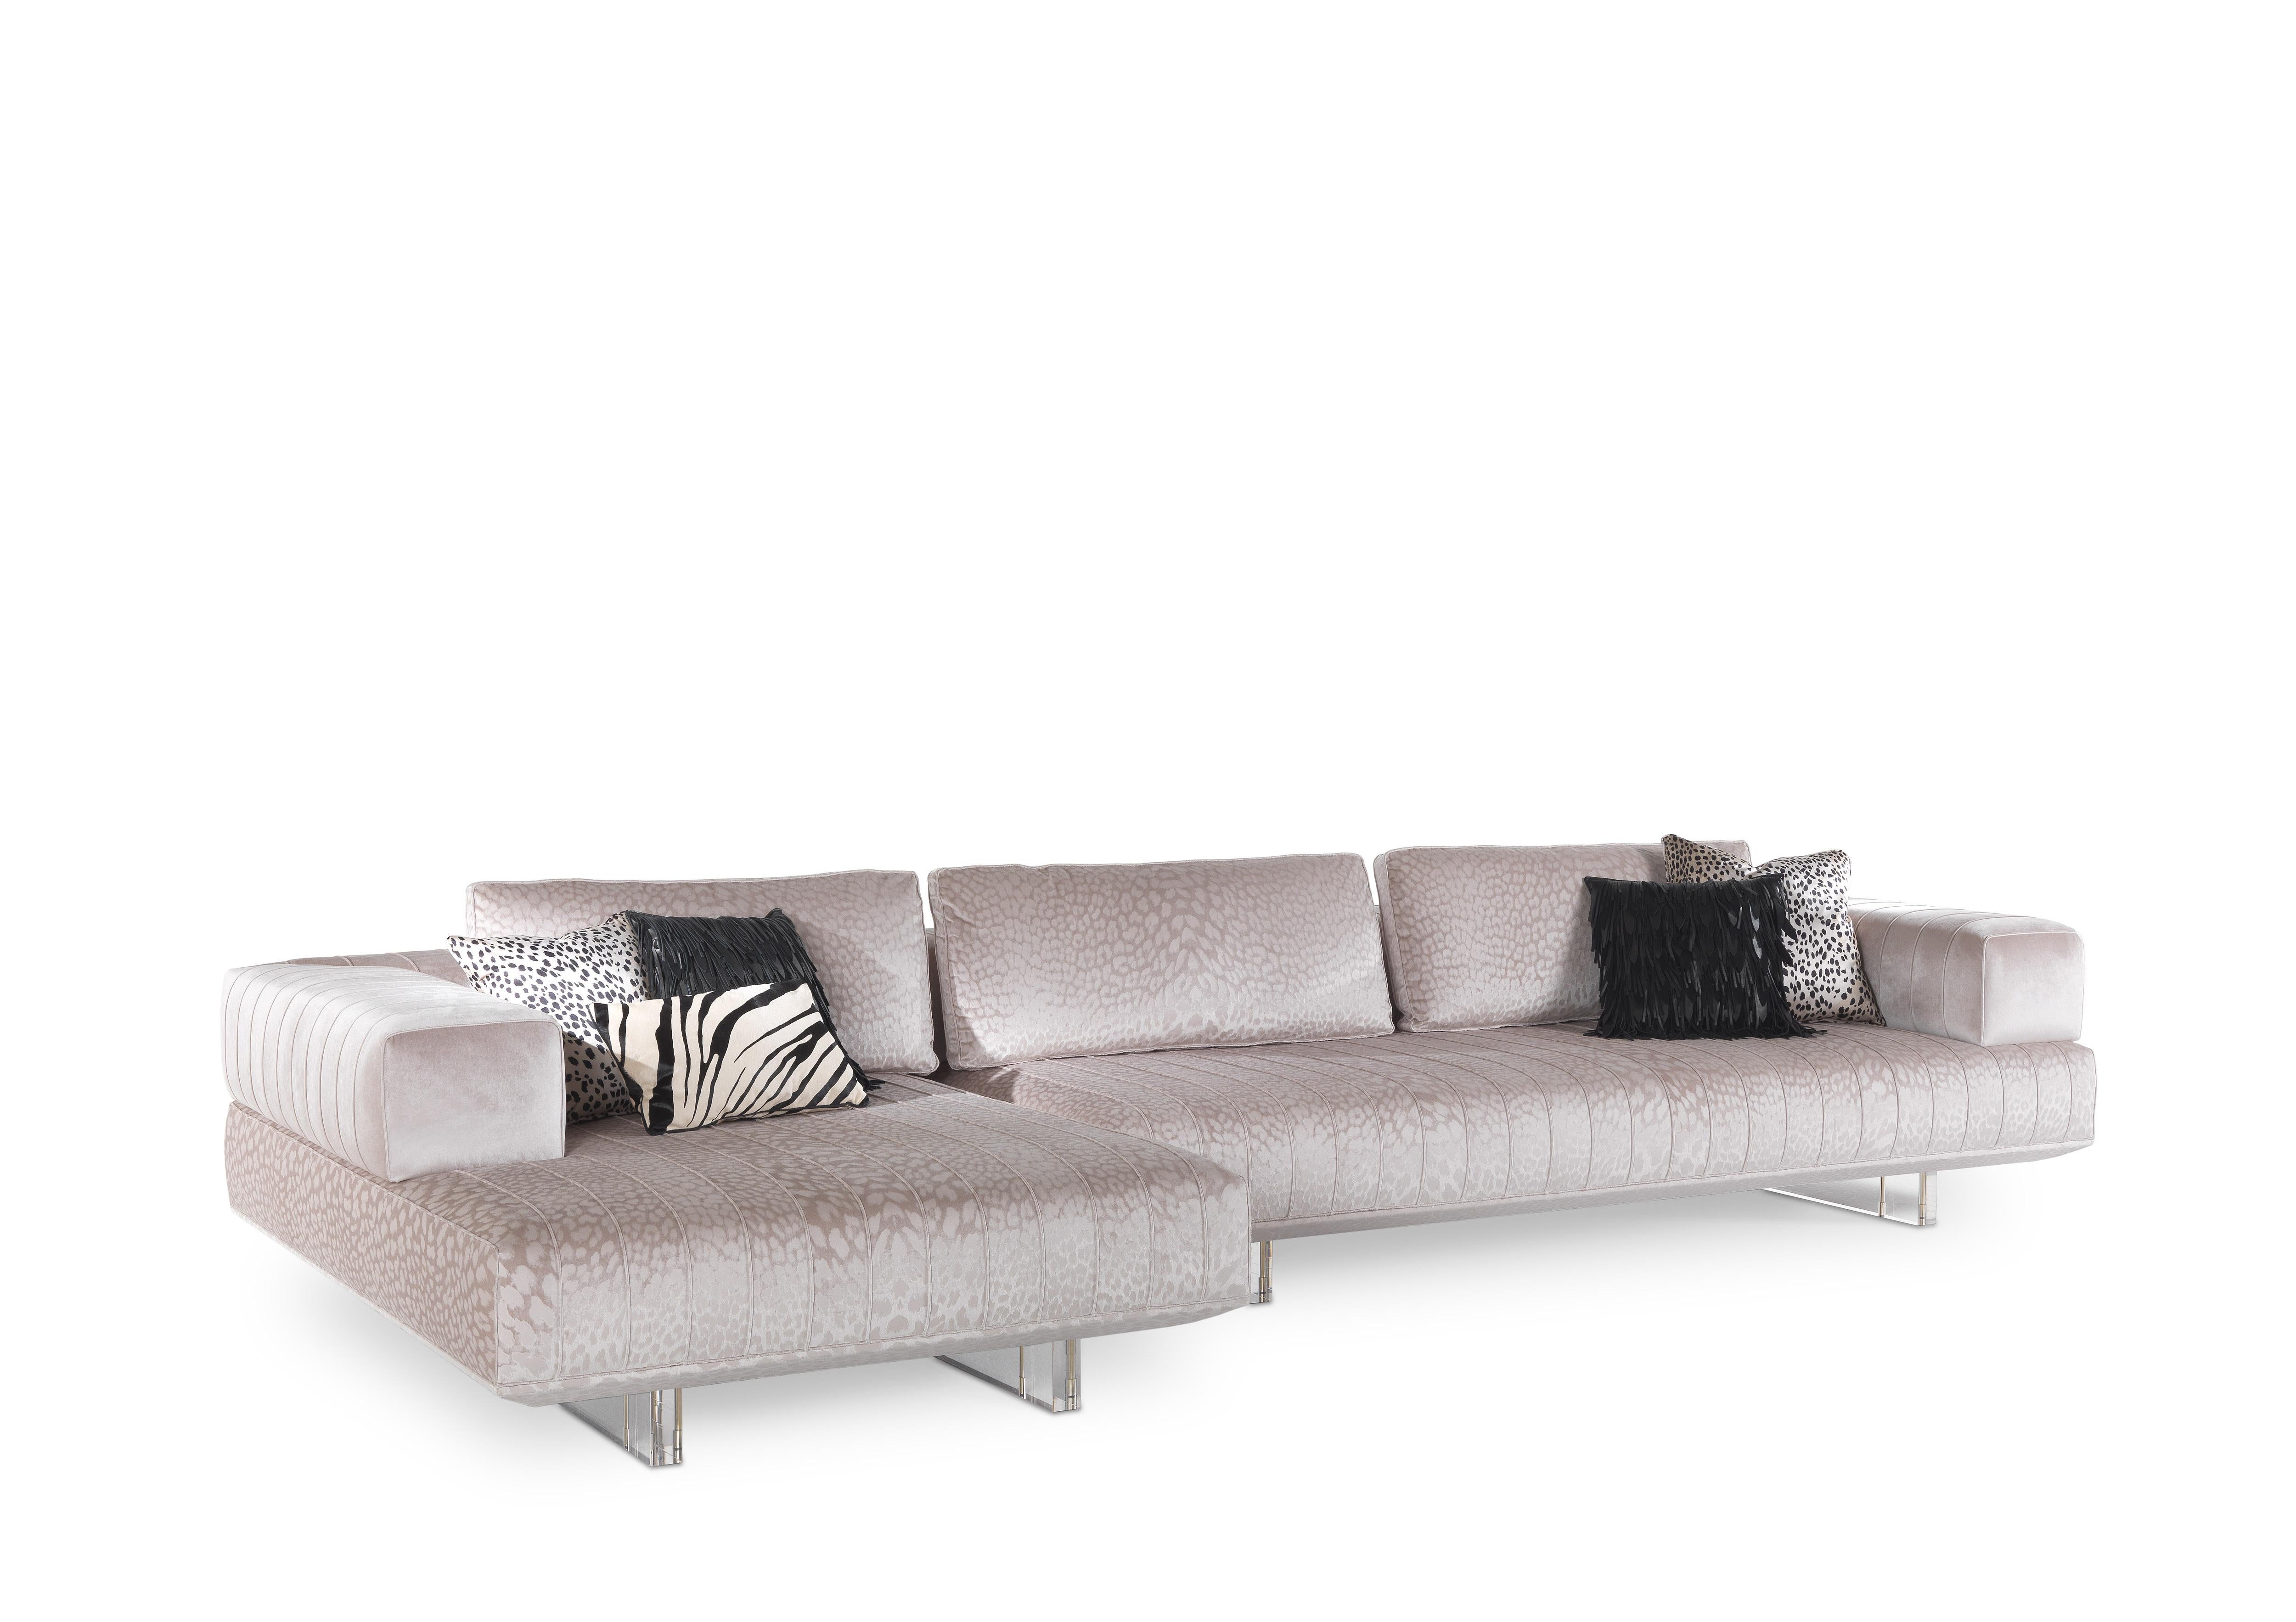 Contemporary lines and vintage references for the Aruba sofa, available in 2 or 3-seat versions or modular according to customer needs. The light legs in transparent plexiglass give the sofa a touch of 1970s style while the processing of the